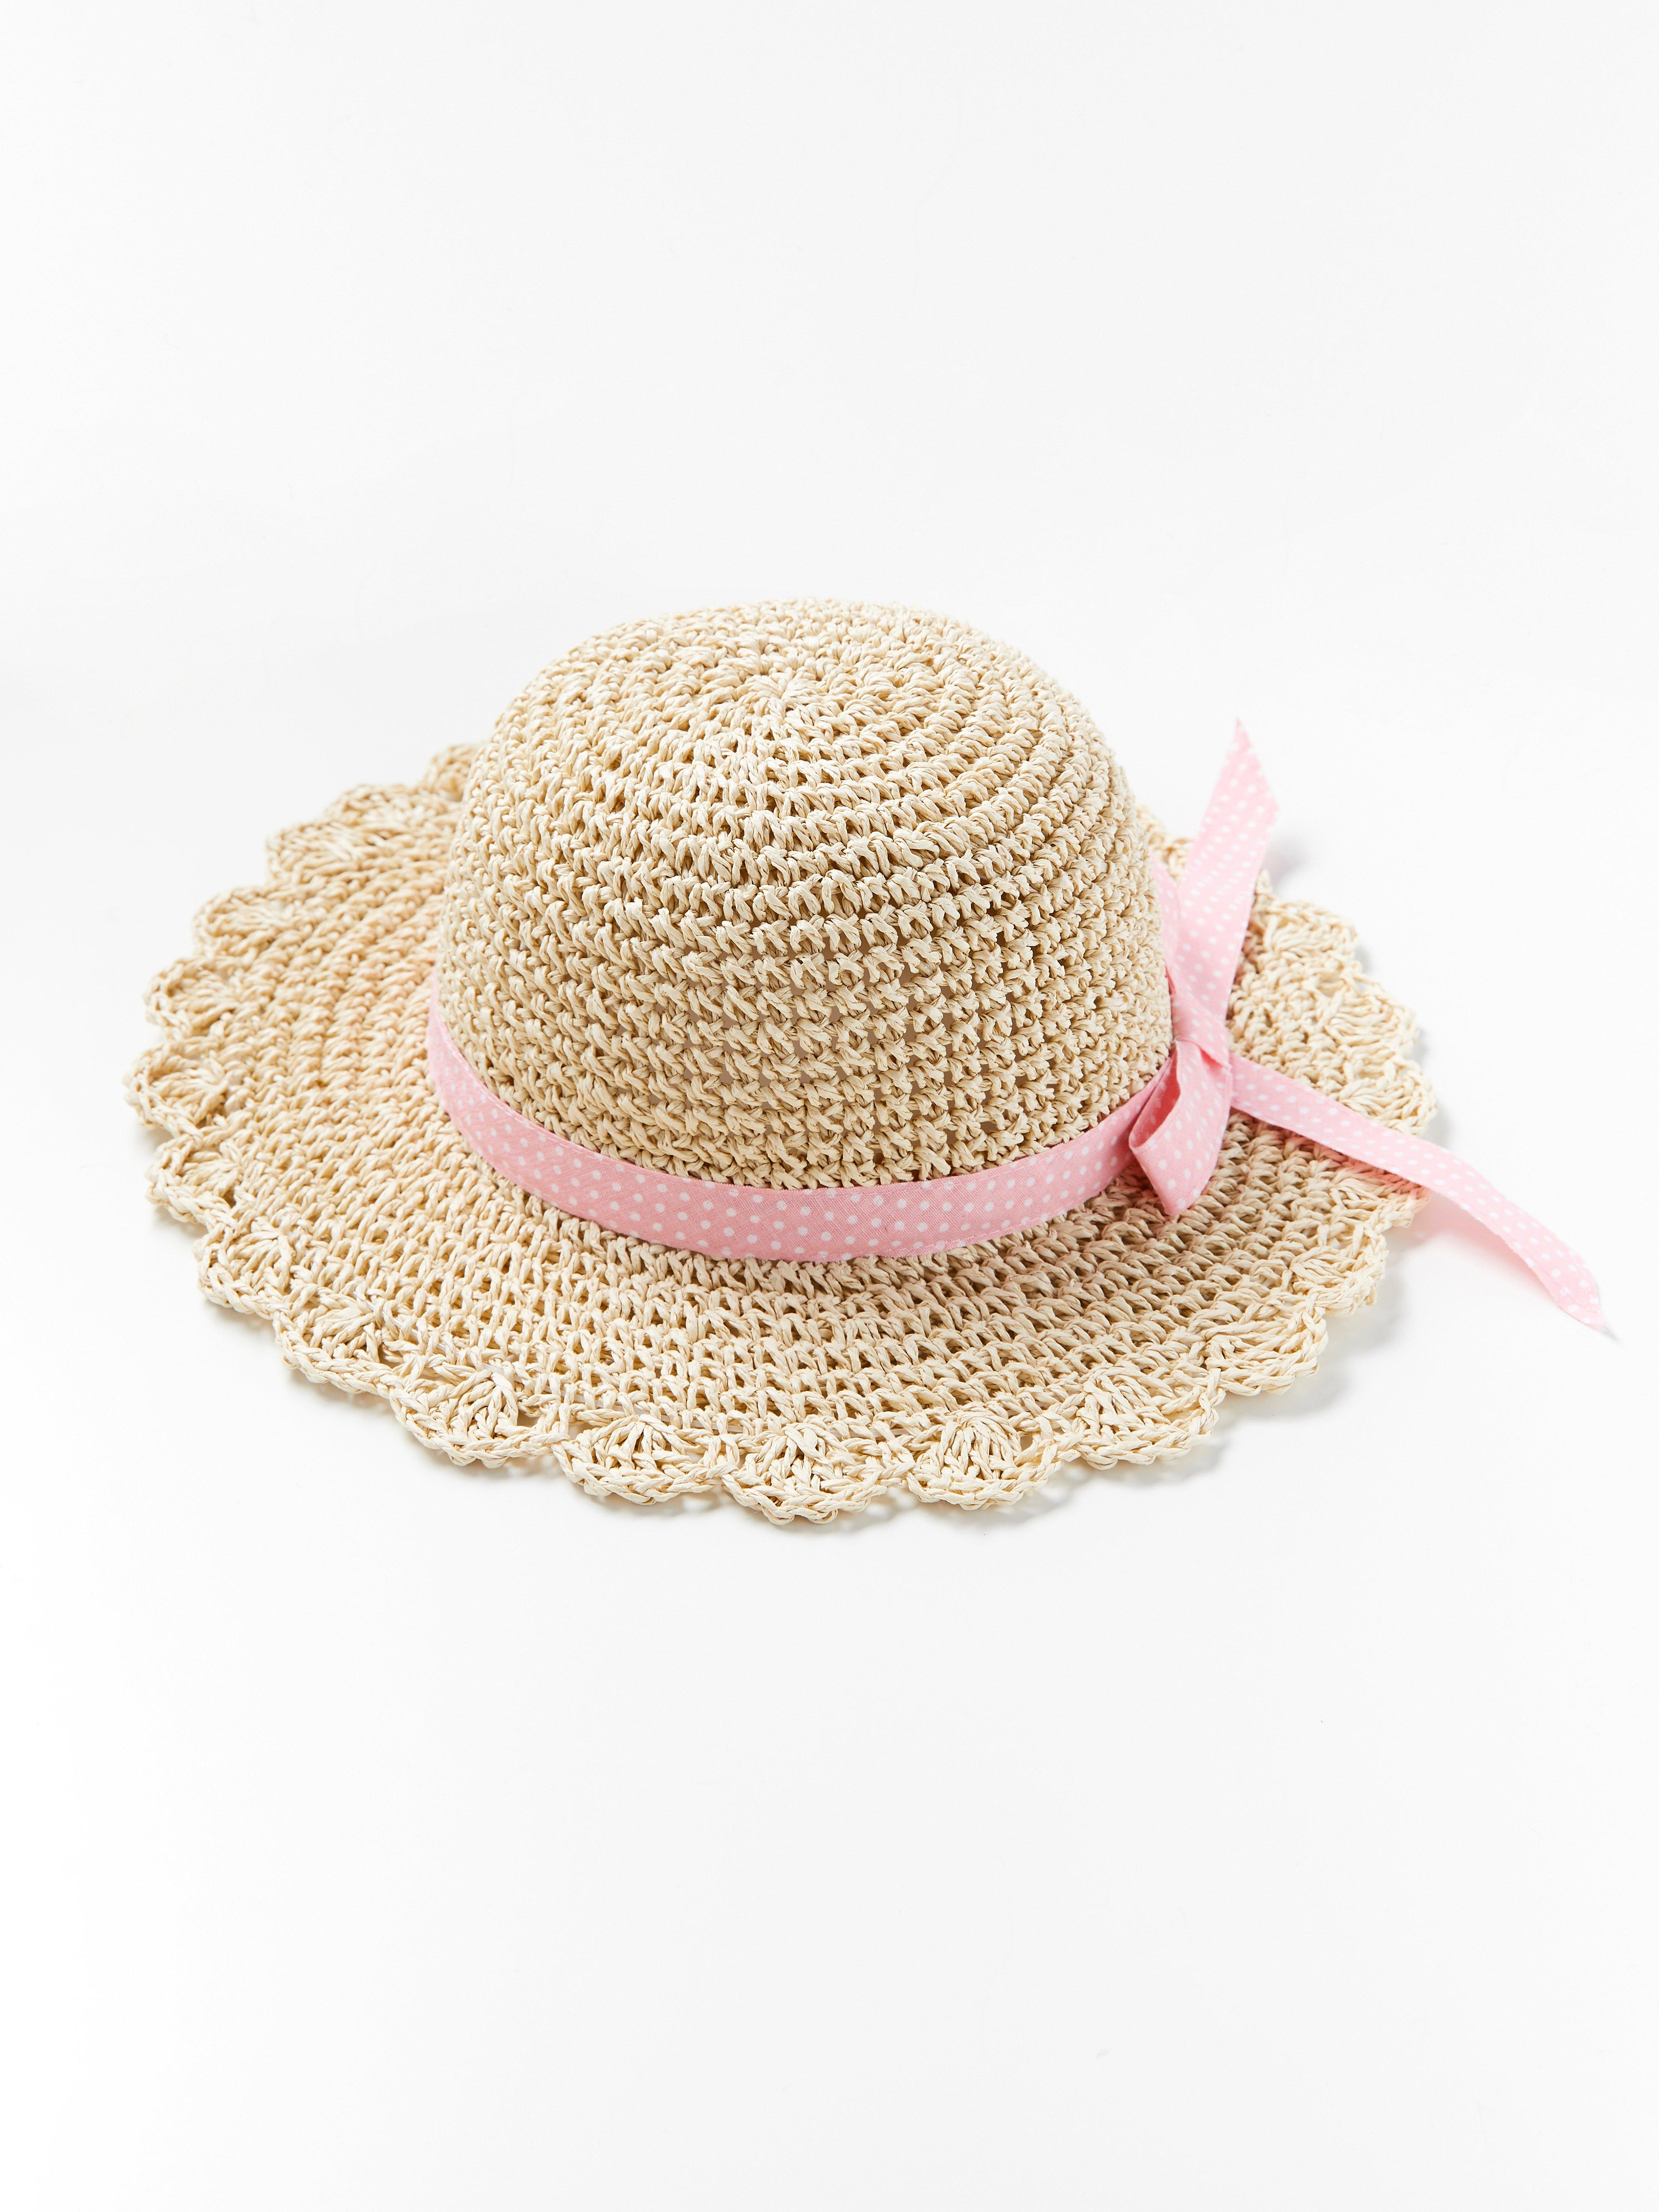 Round straw hat with pink ribbon | Lindex.com